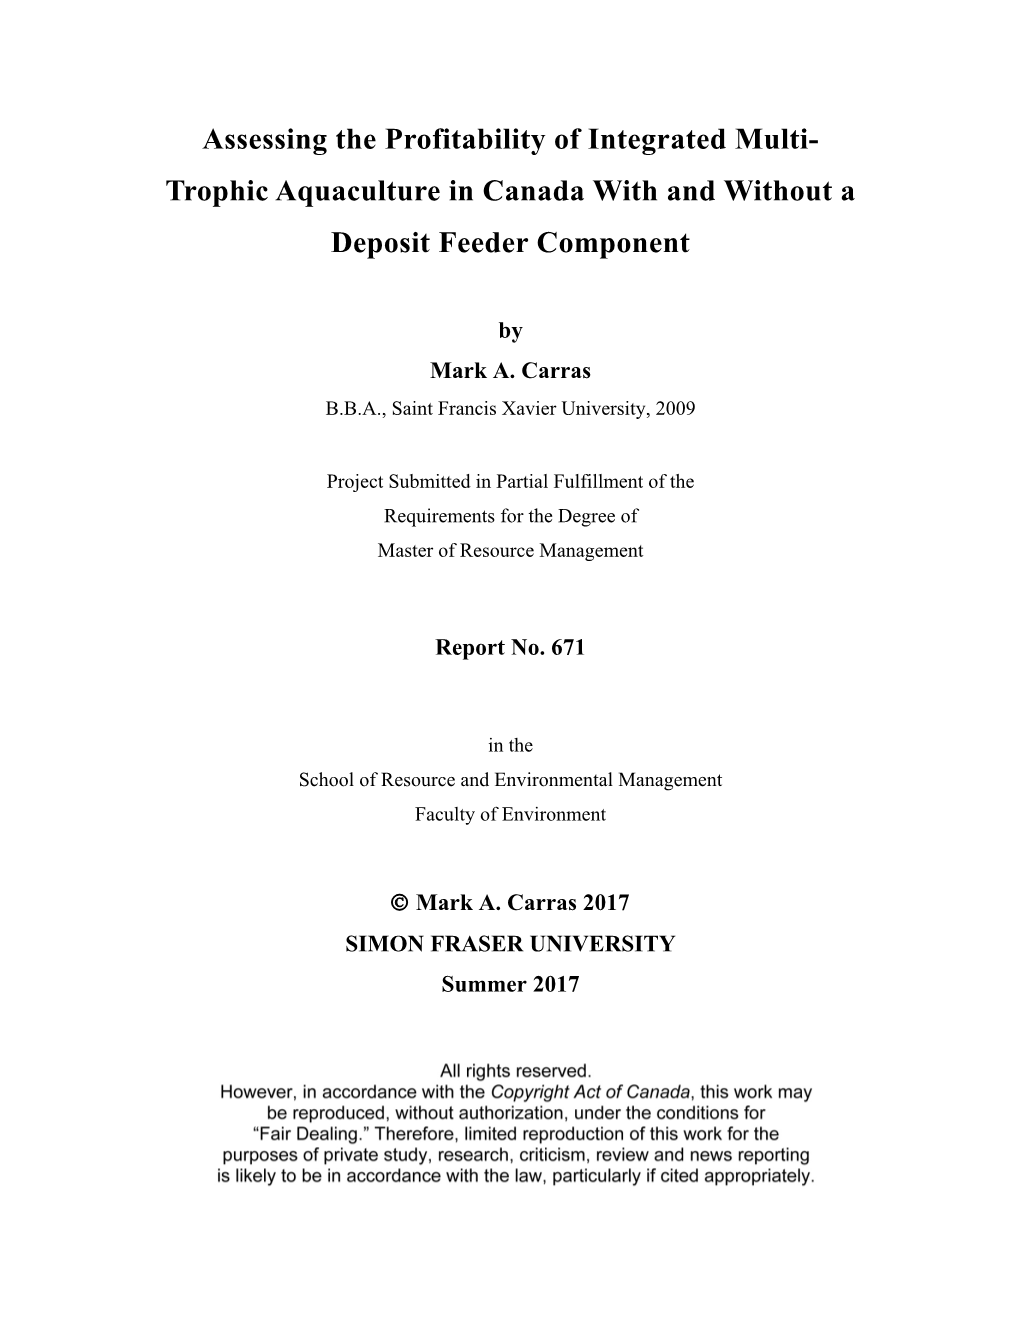 Trophic Aquaculture in Canada with and Without a Deposit Feeder Component